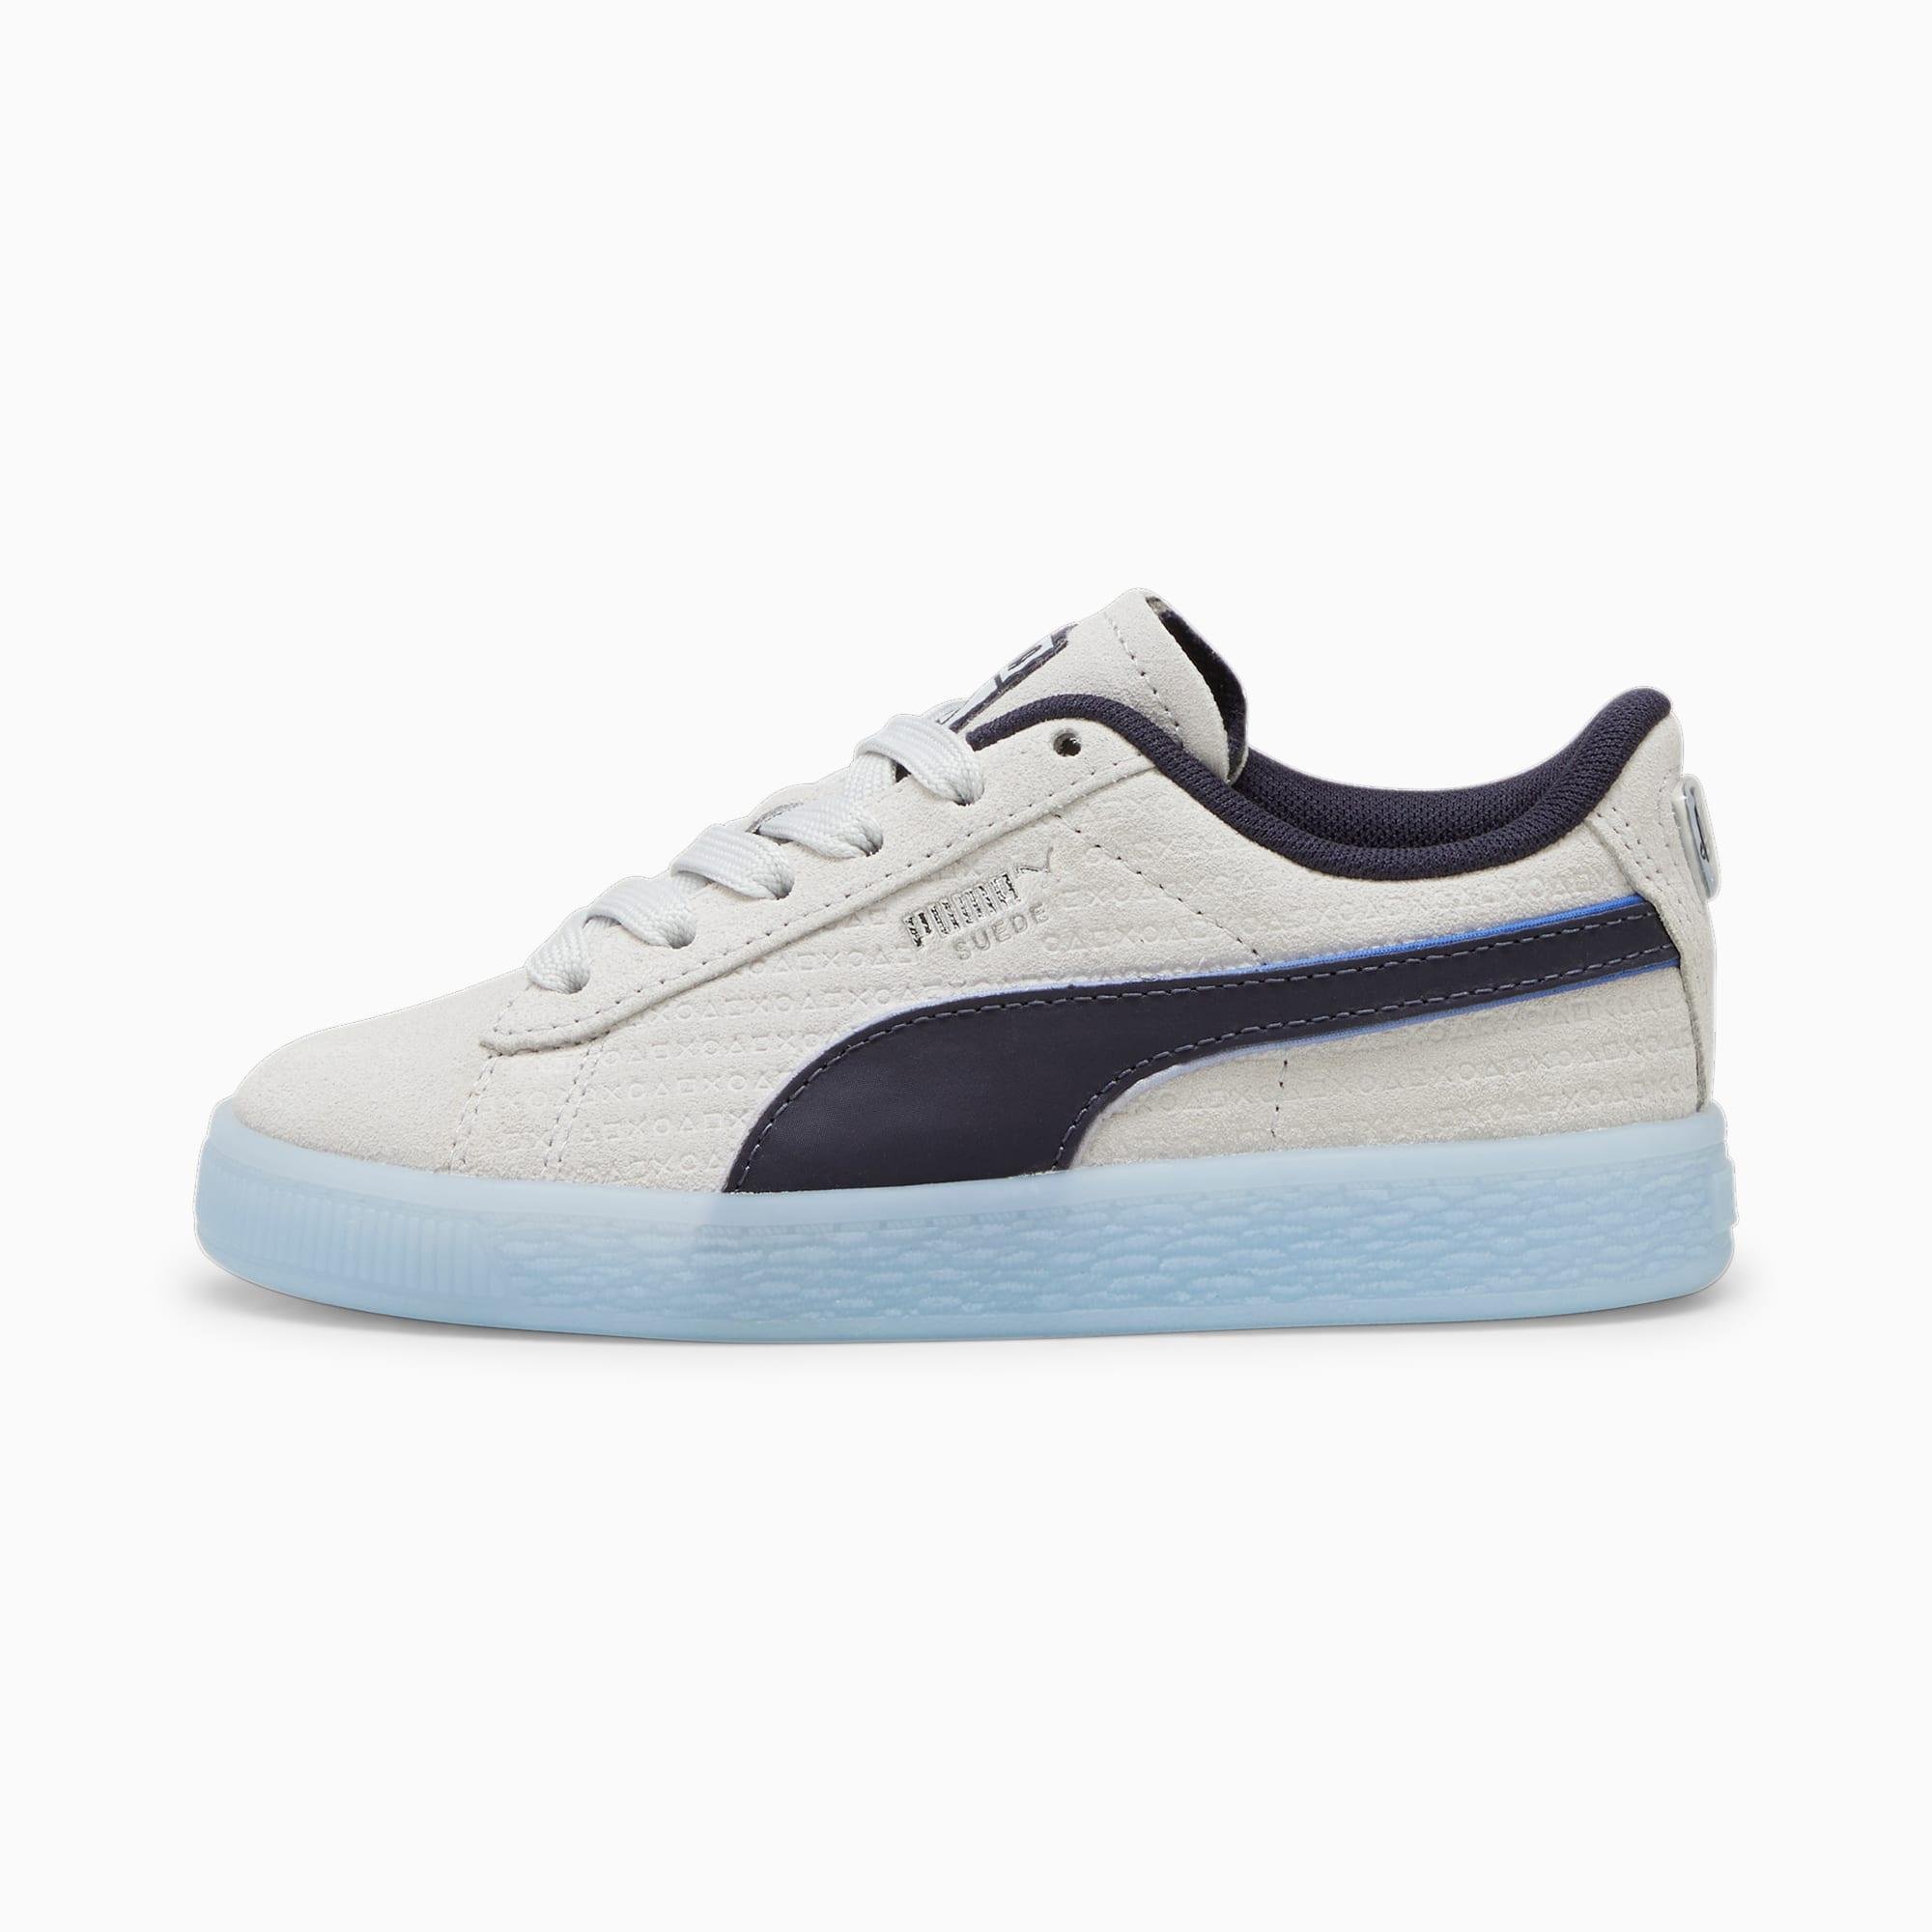 PUMA x PLAYSTATION® Suede Little Kids' Sneakers by PUMA